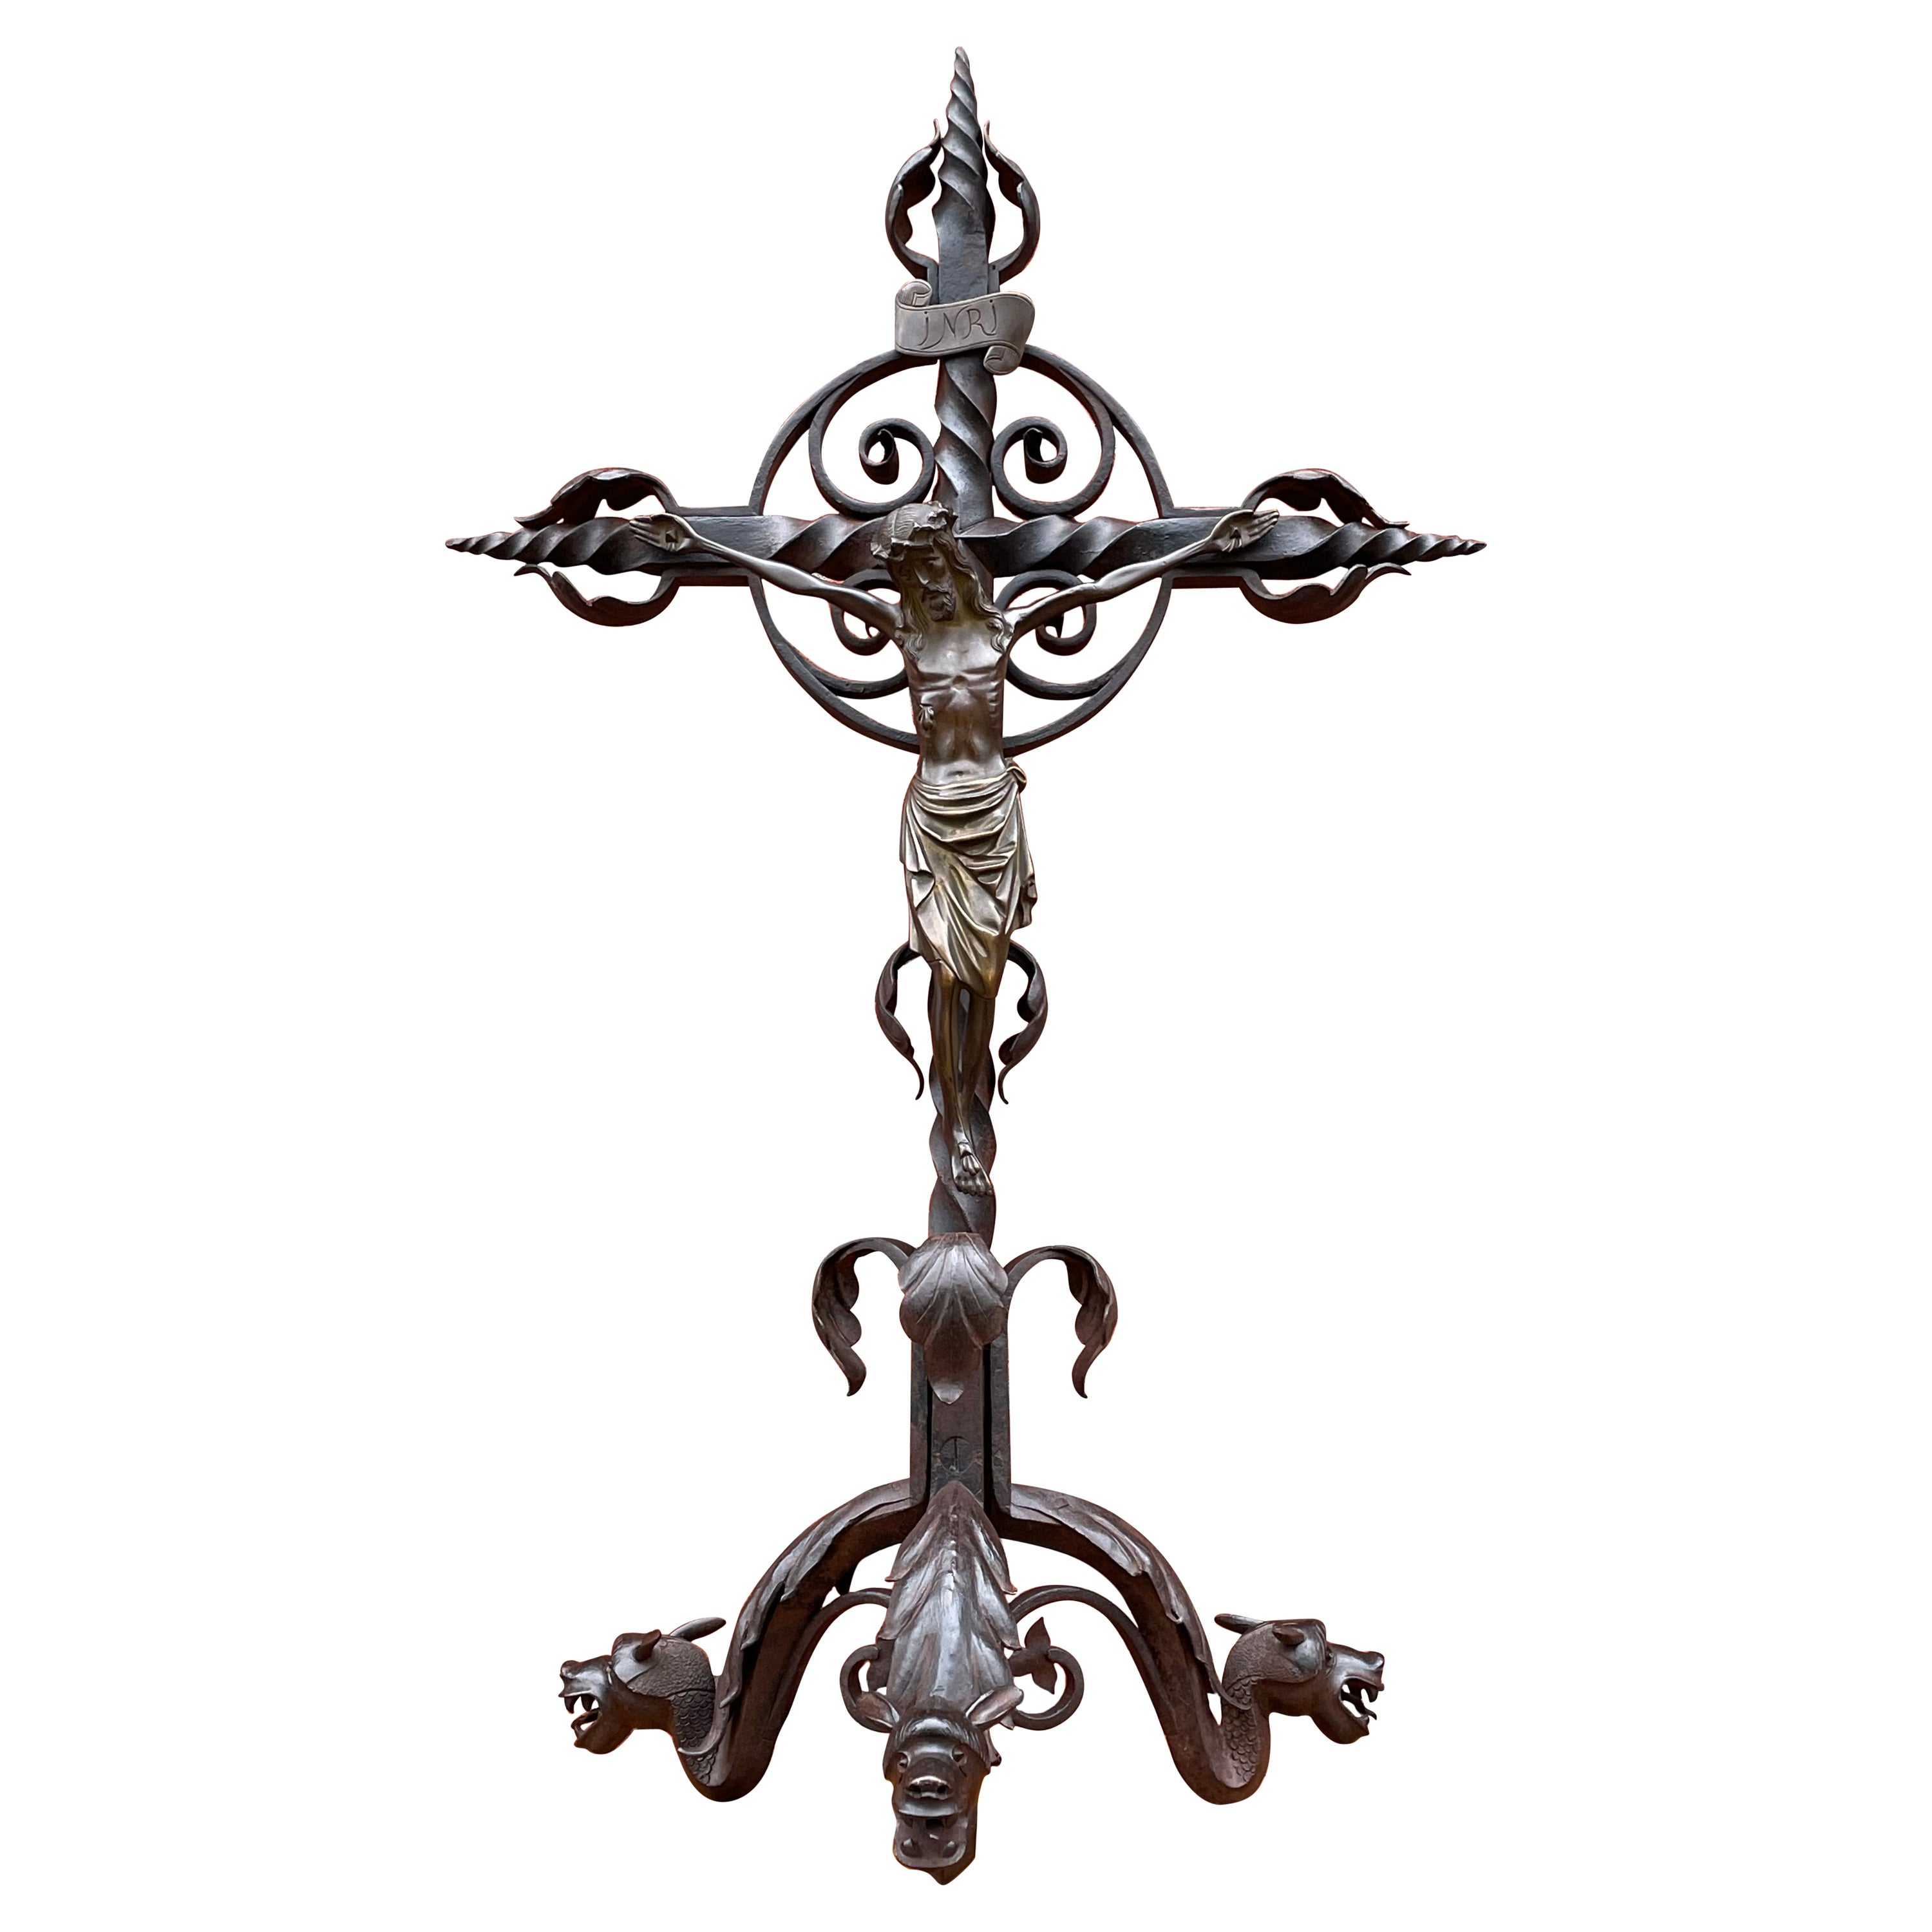 Gothic Dragons Base Wrought Iron Altar Crucifix with Bronze Sculpture of Christ For Sale